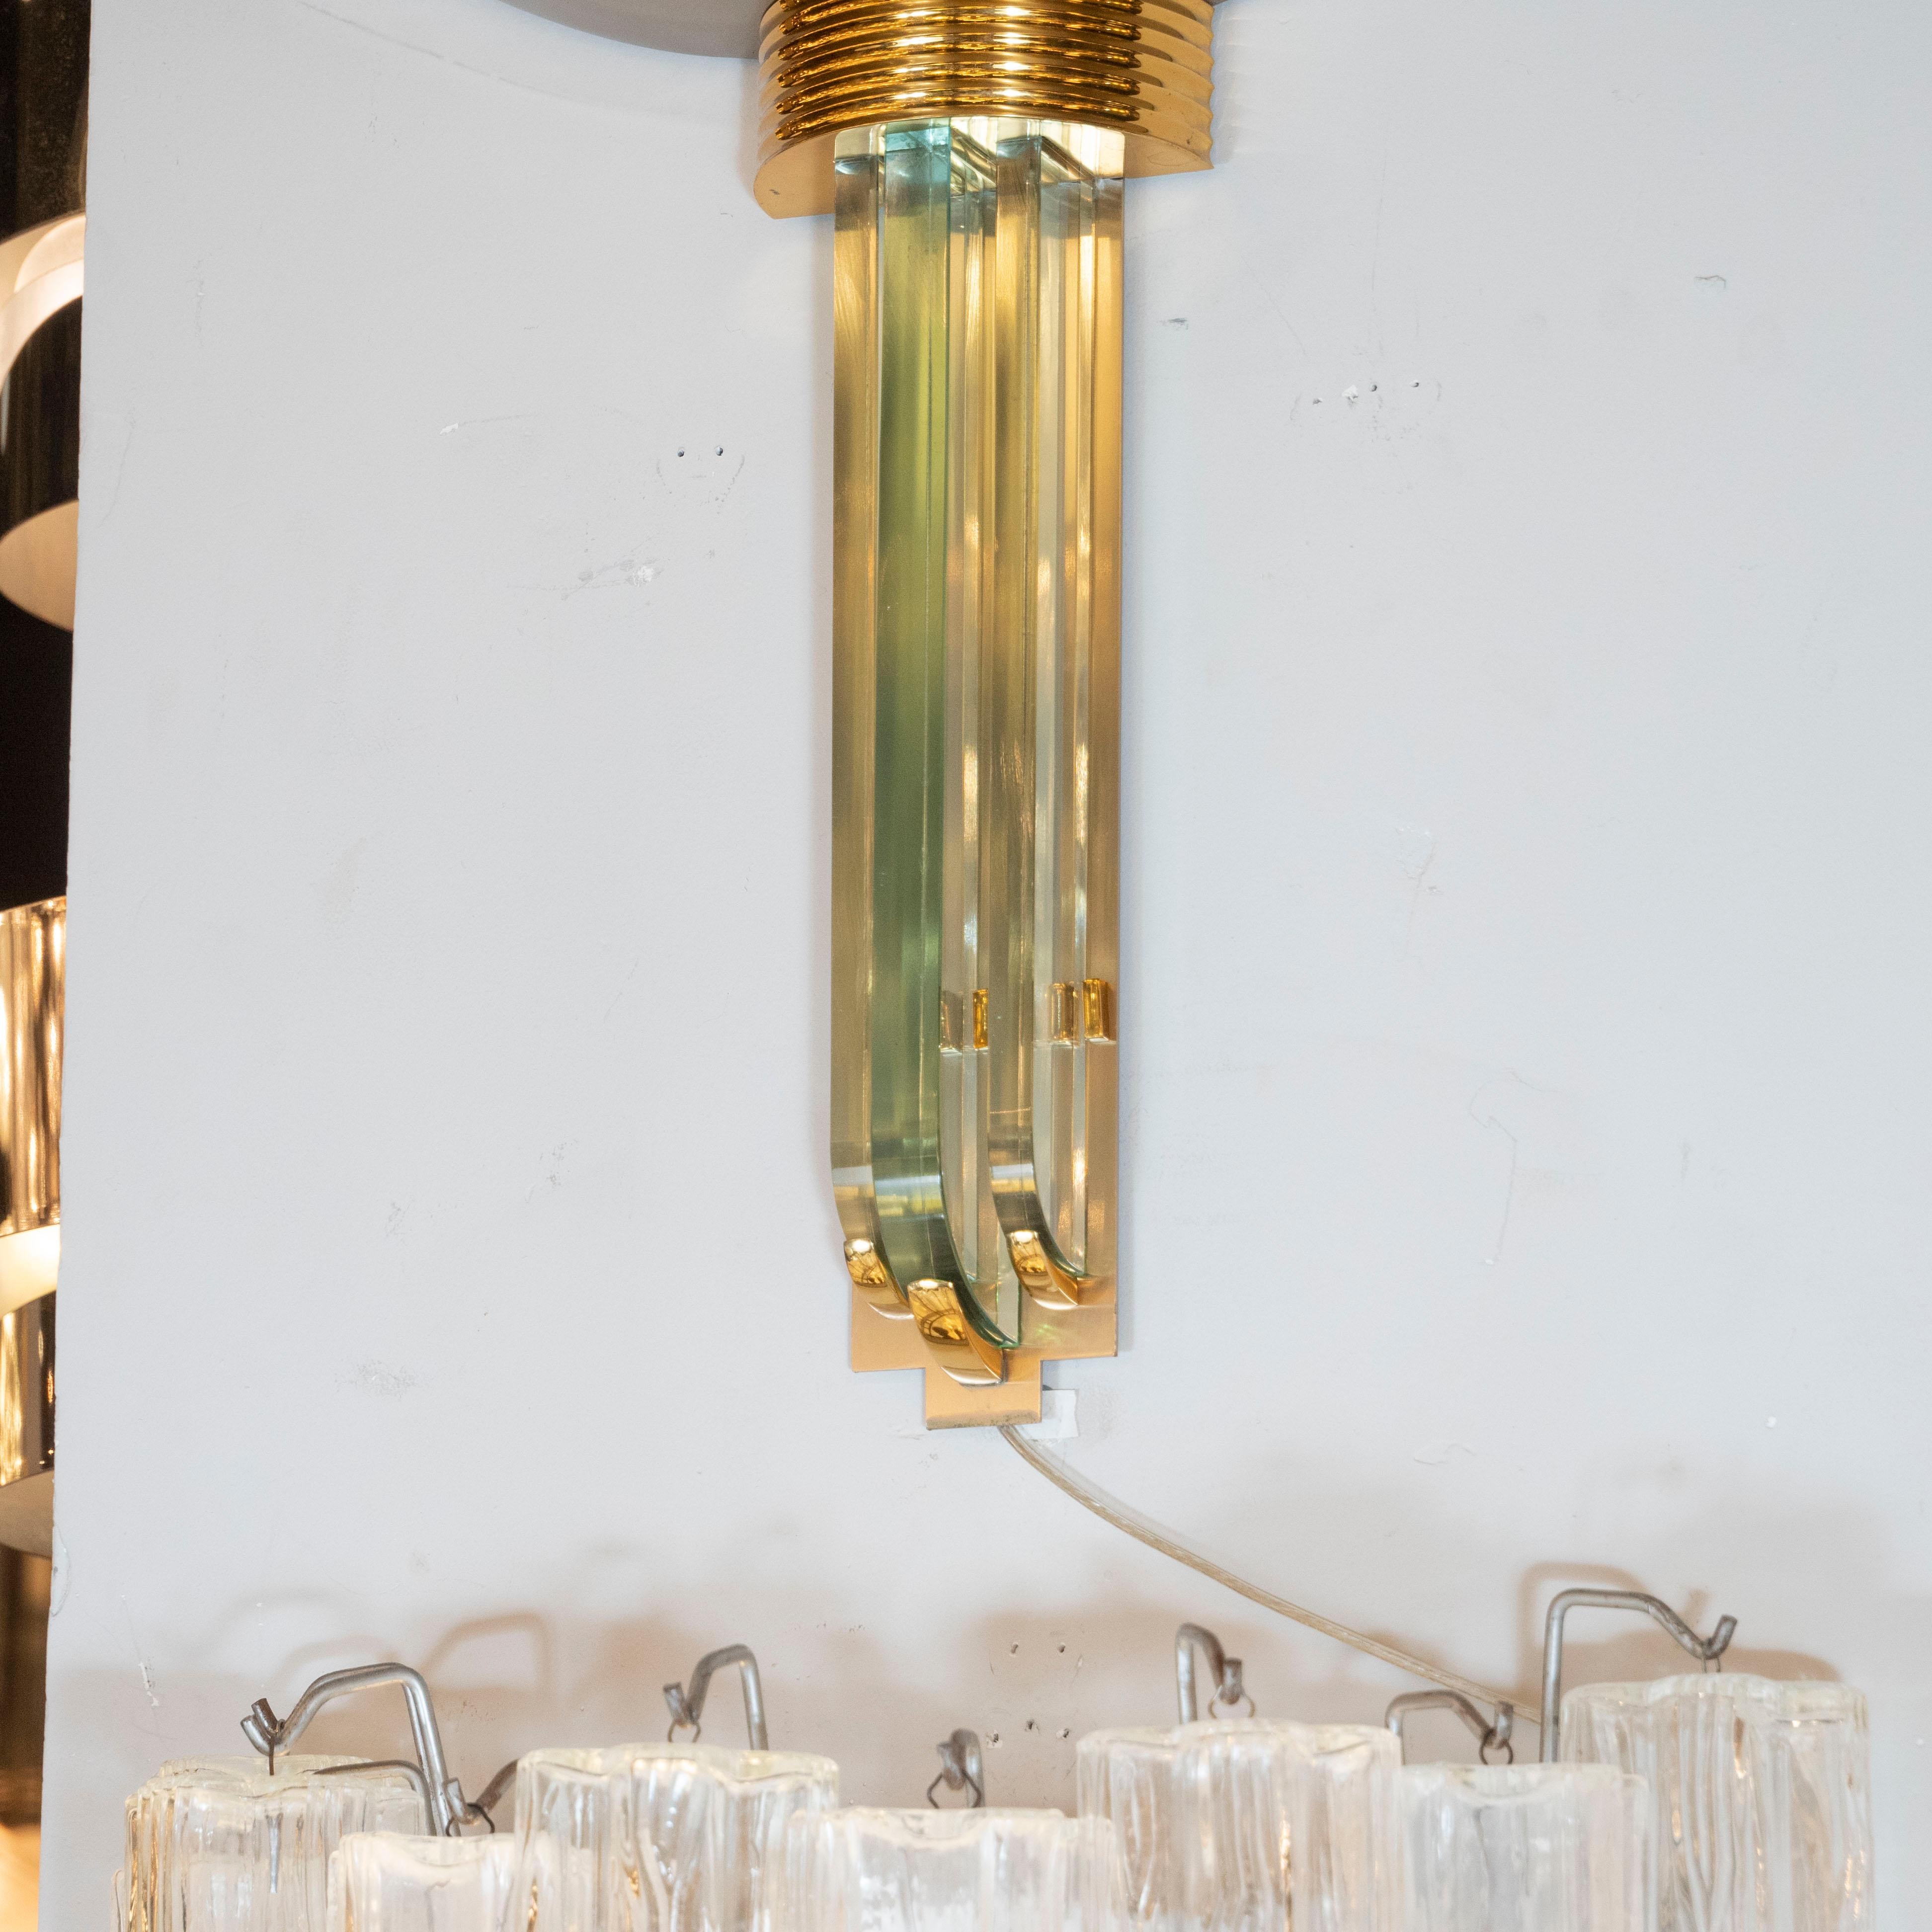 Mid-Century Modern Art Deco Revival Contrasting Metallic Sconce In Excellent Condition For Sale In New York, NY